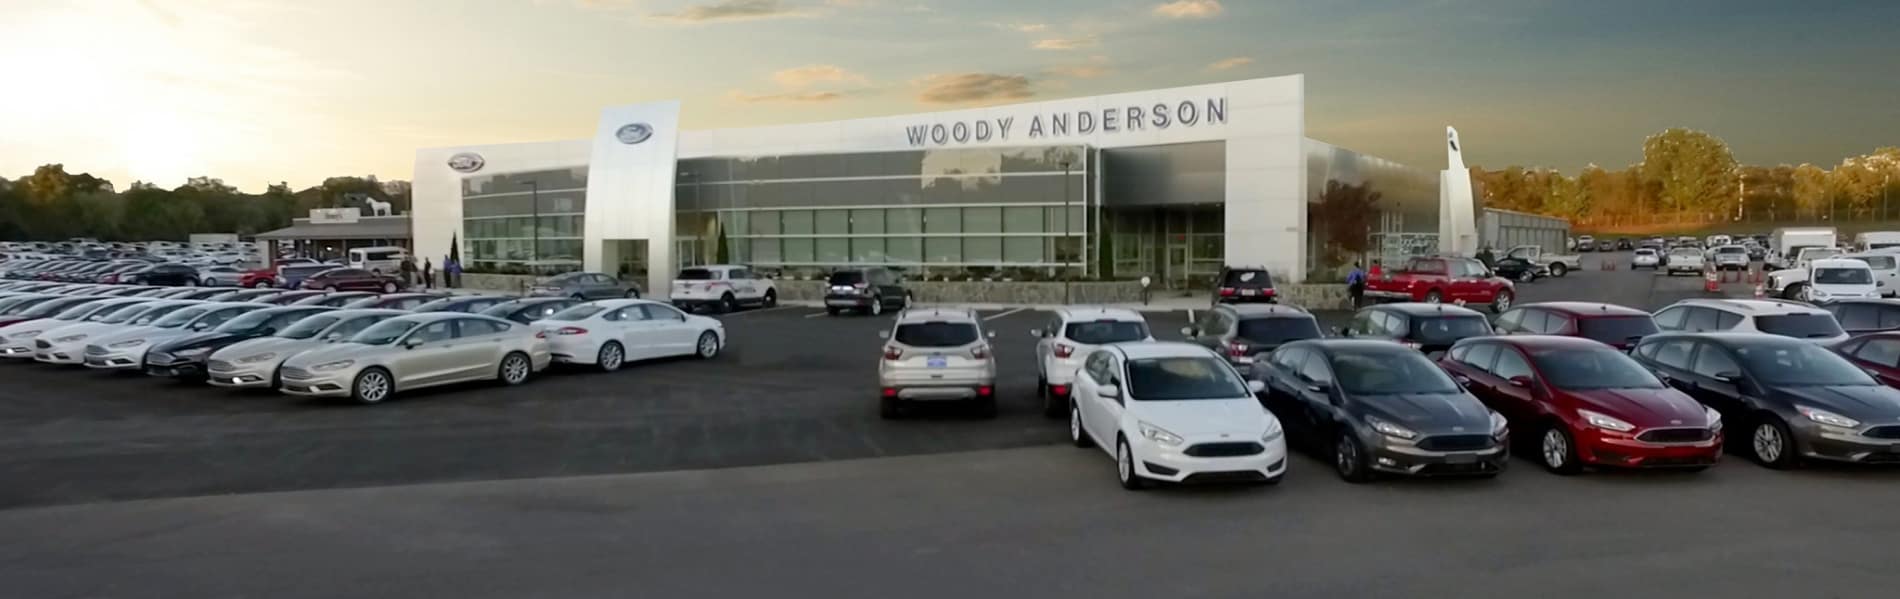 Exterior view of dealership